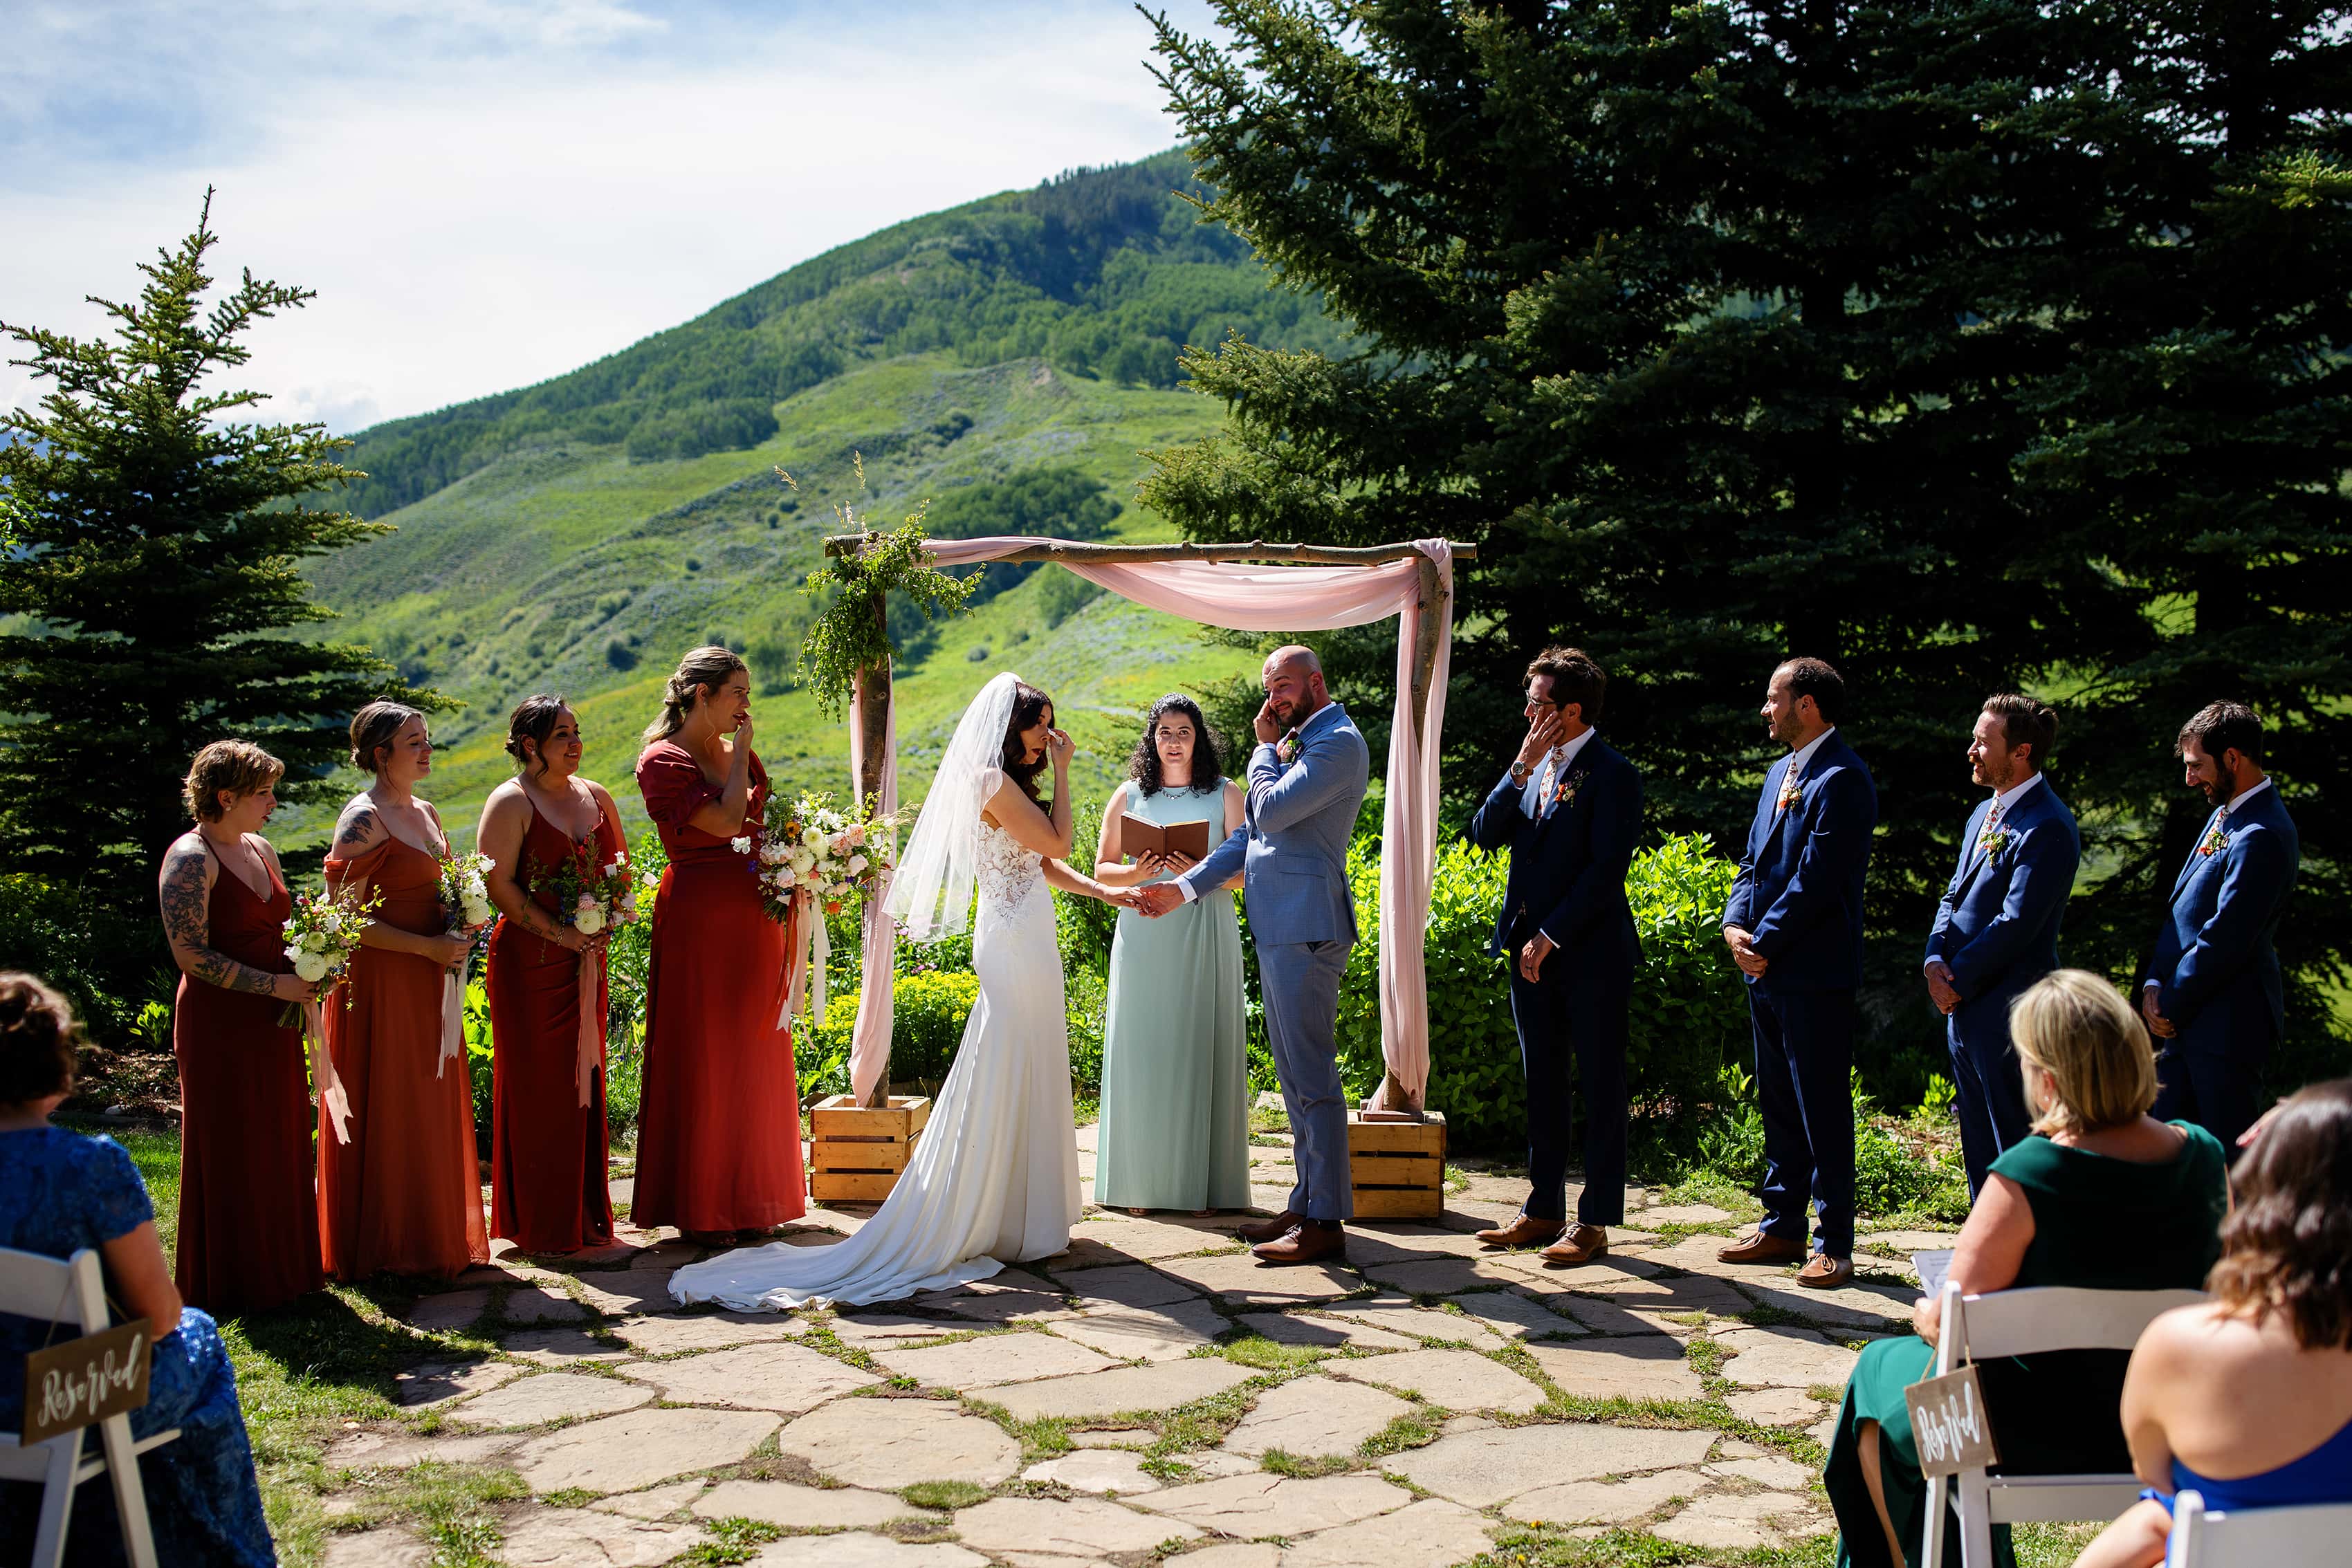 The bride and groom wipe away tears during their ceremony at Mountain Wedding Garden